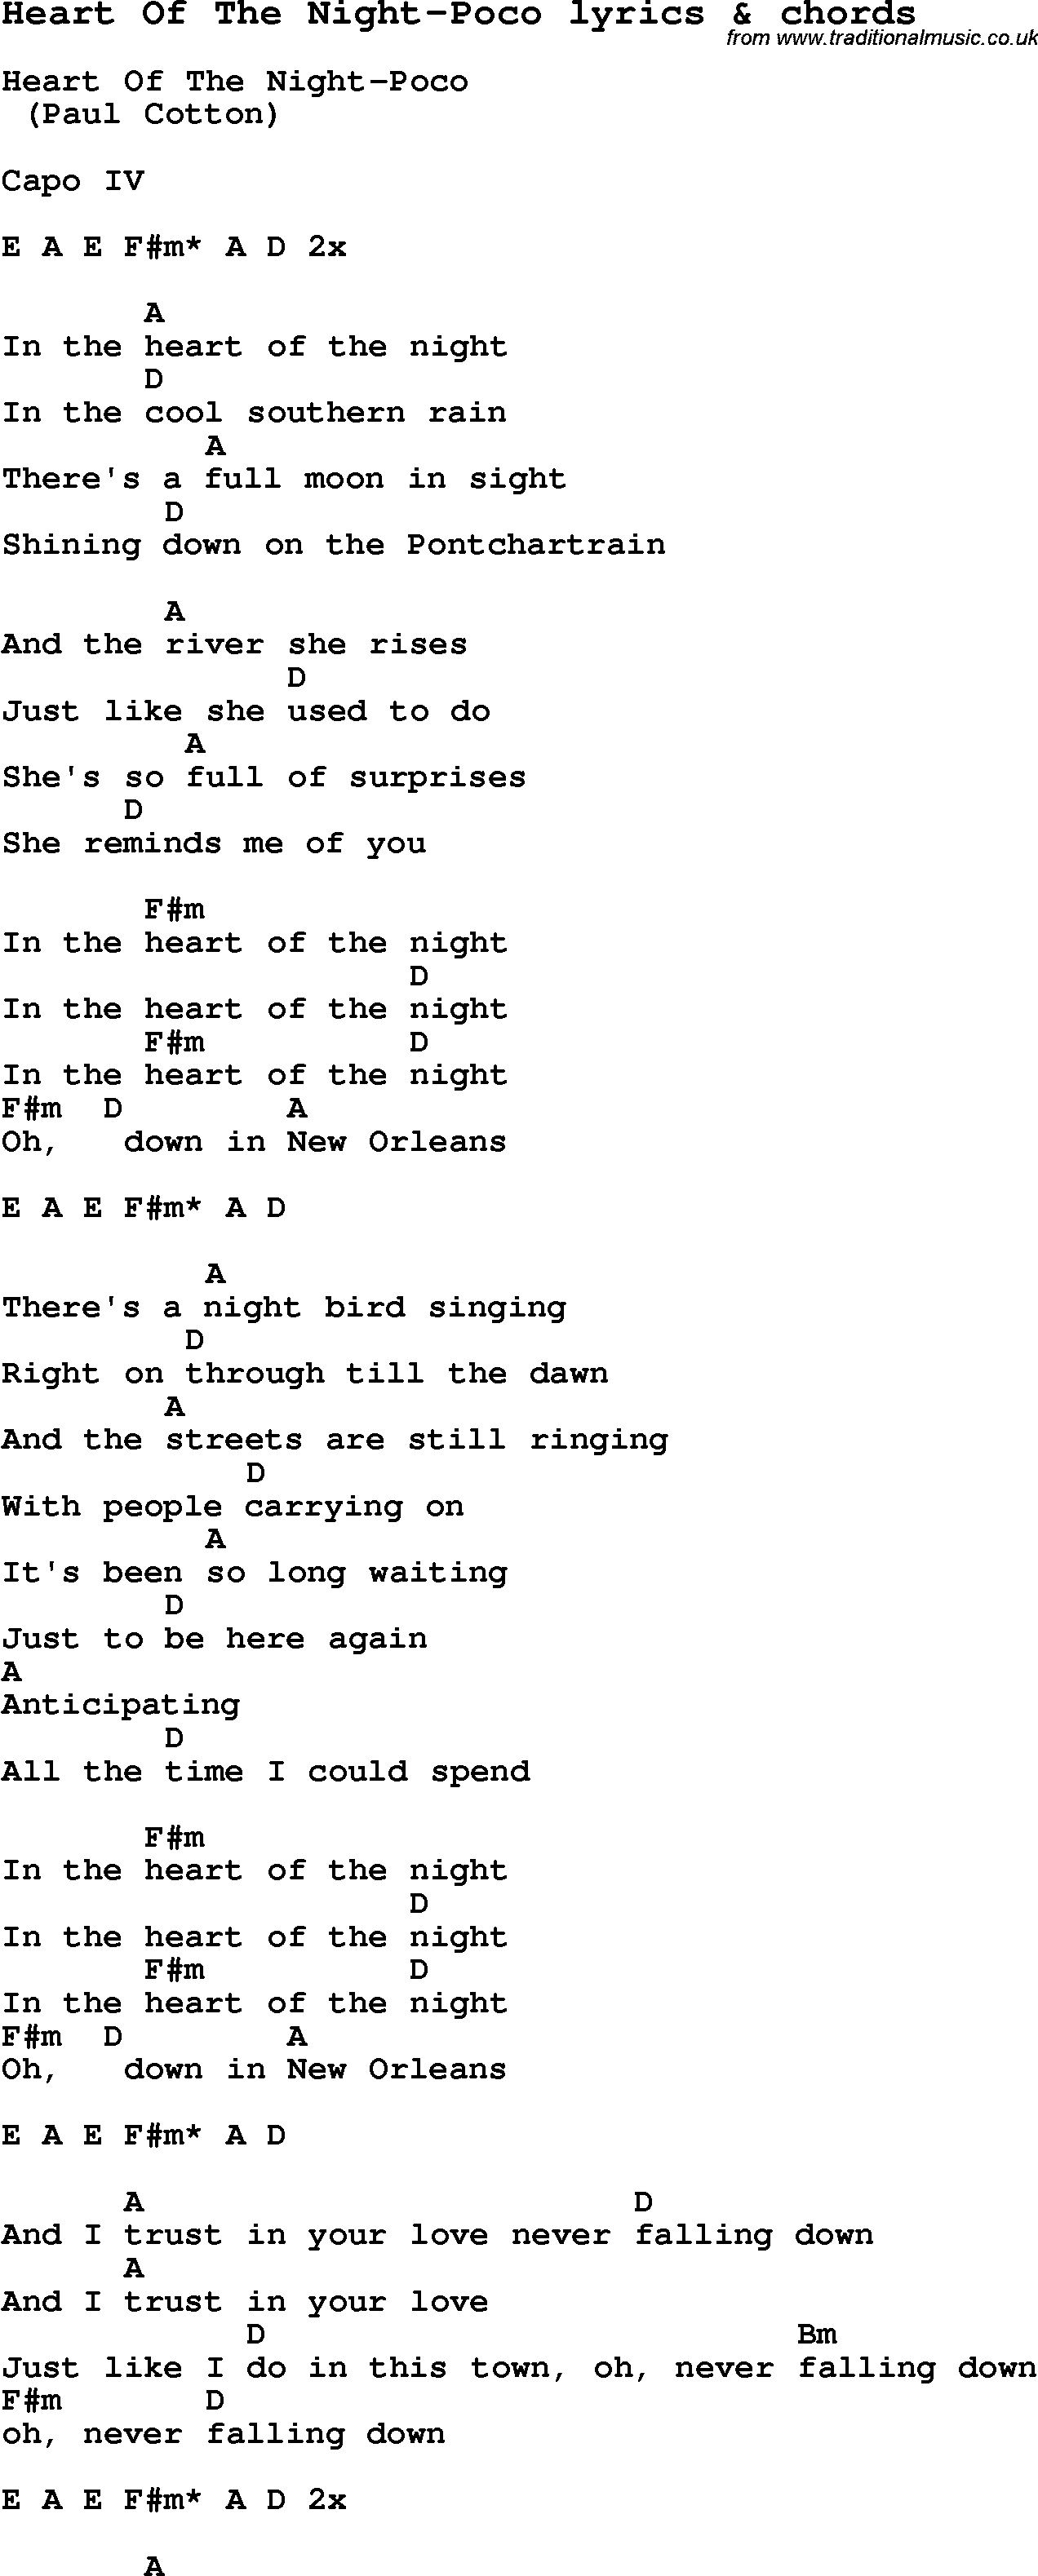 Love Song Lyrics for: Heart Of The Night-Poco with chords for Ukulele, Guitar Banjo etc.